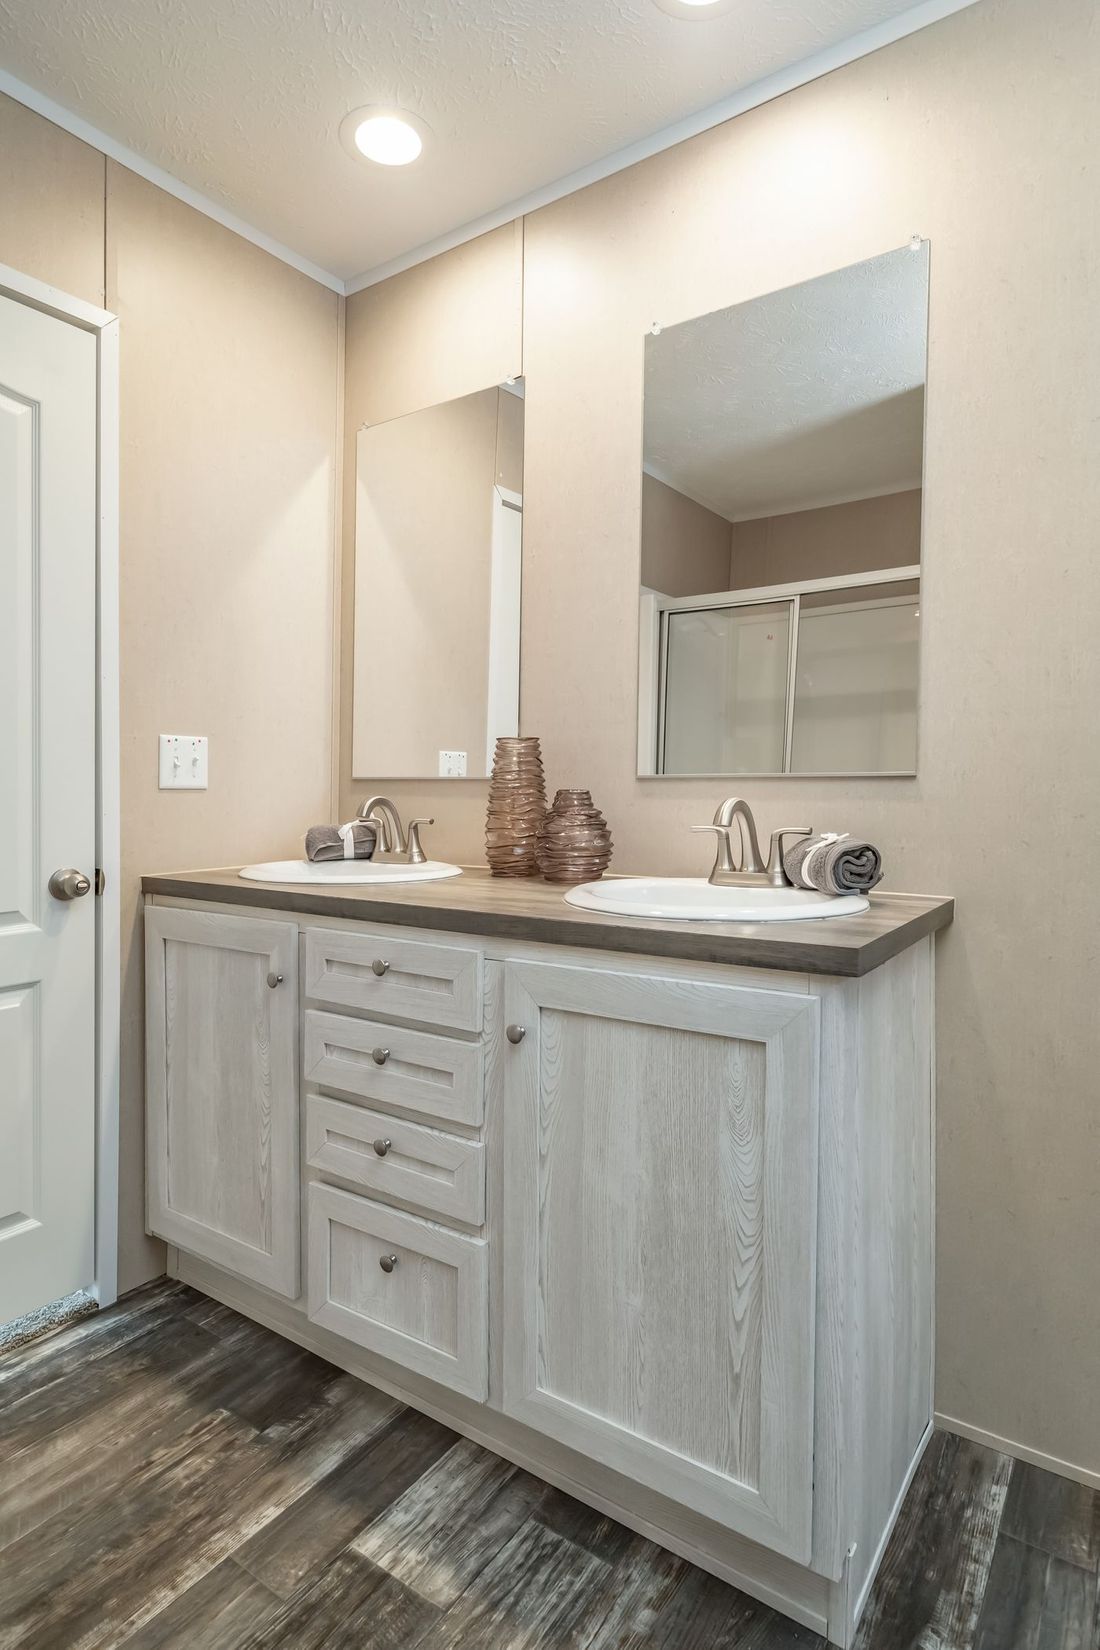 The ULTRA EXCEL 4 BR 28X56 Primary Bathroom. This Manufactured Mobile Home features 4 bedrooms and 2 baths.